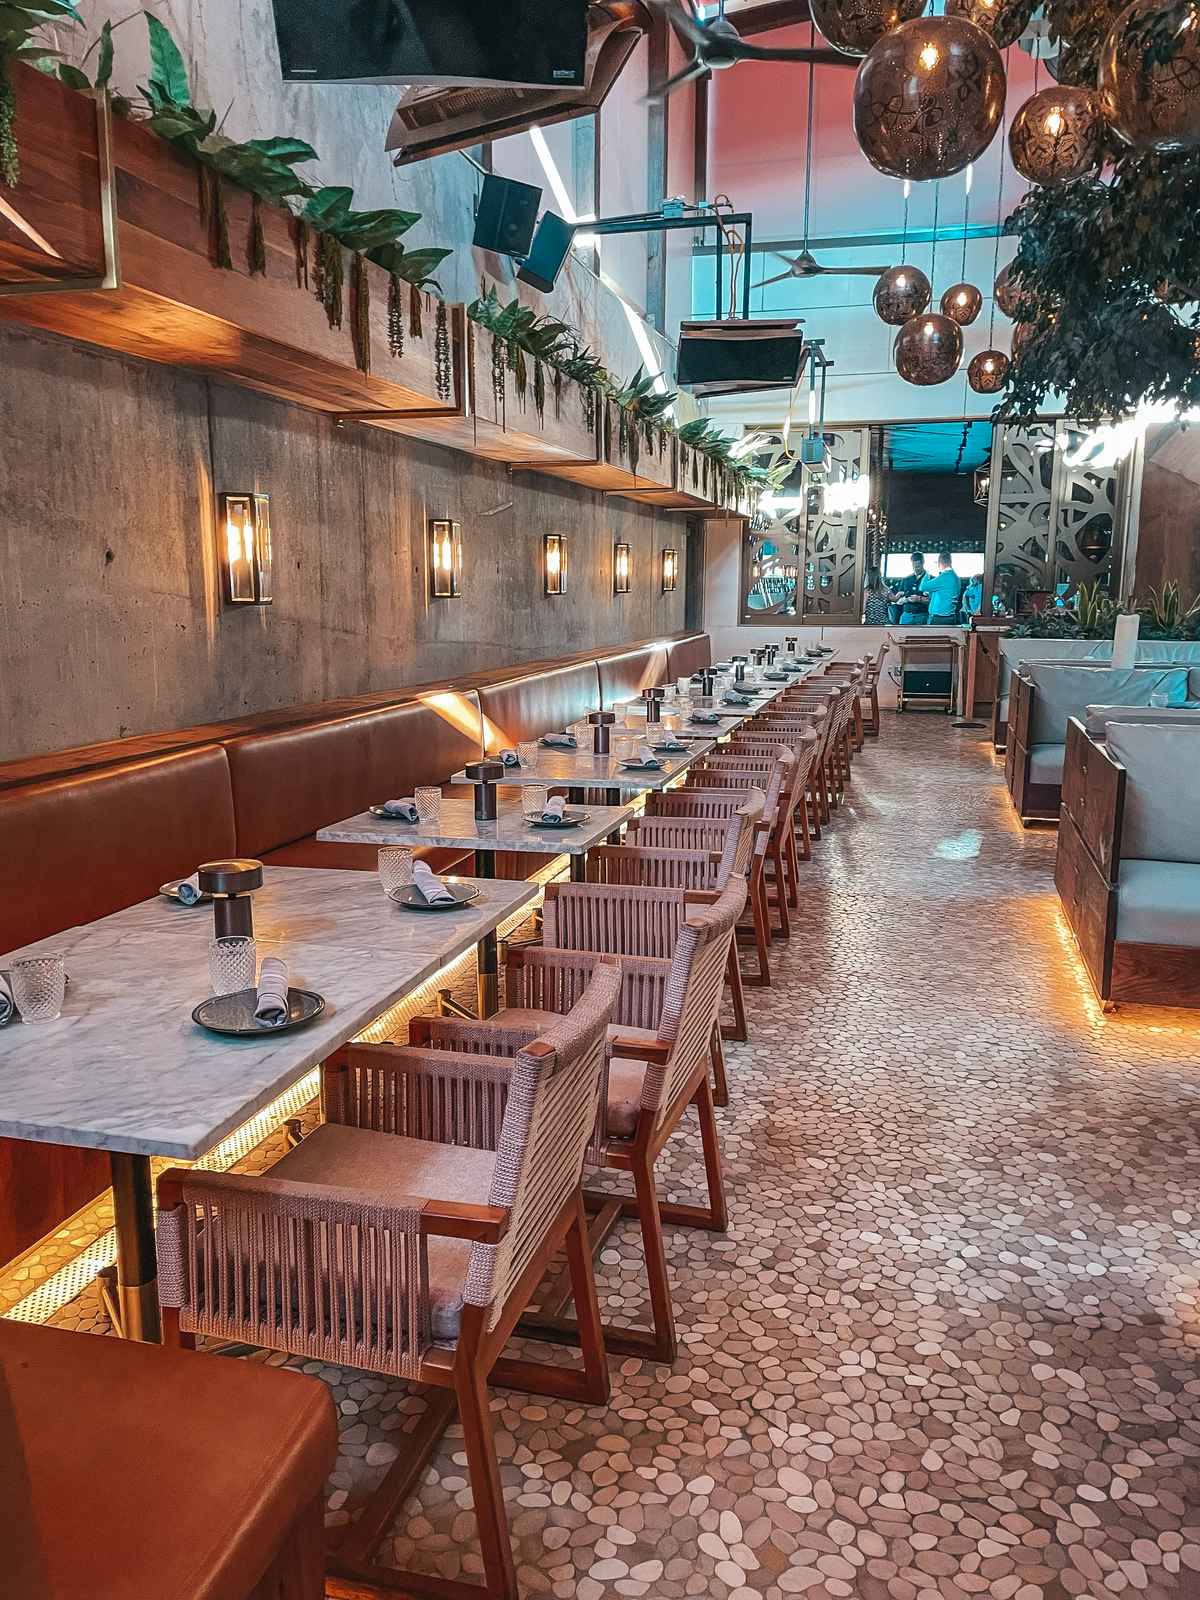 Dining area of Toca Madera restaurant in Scottsdale